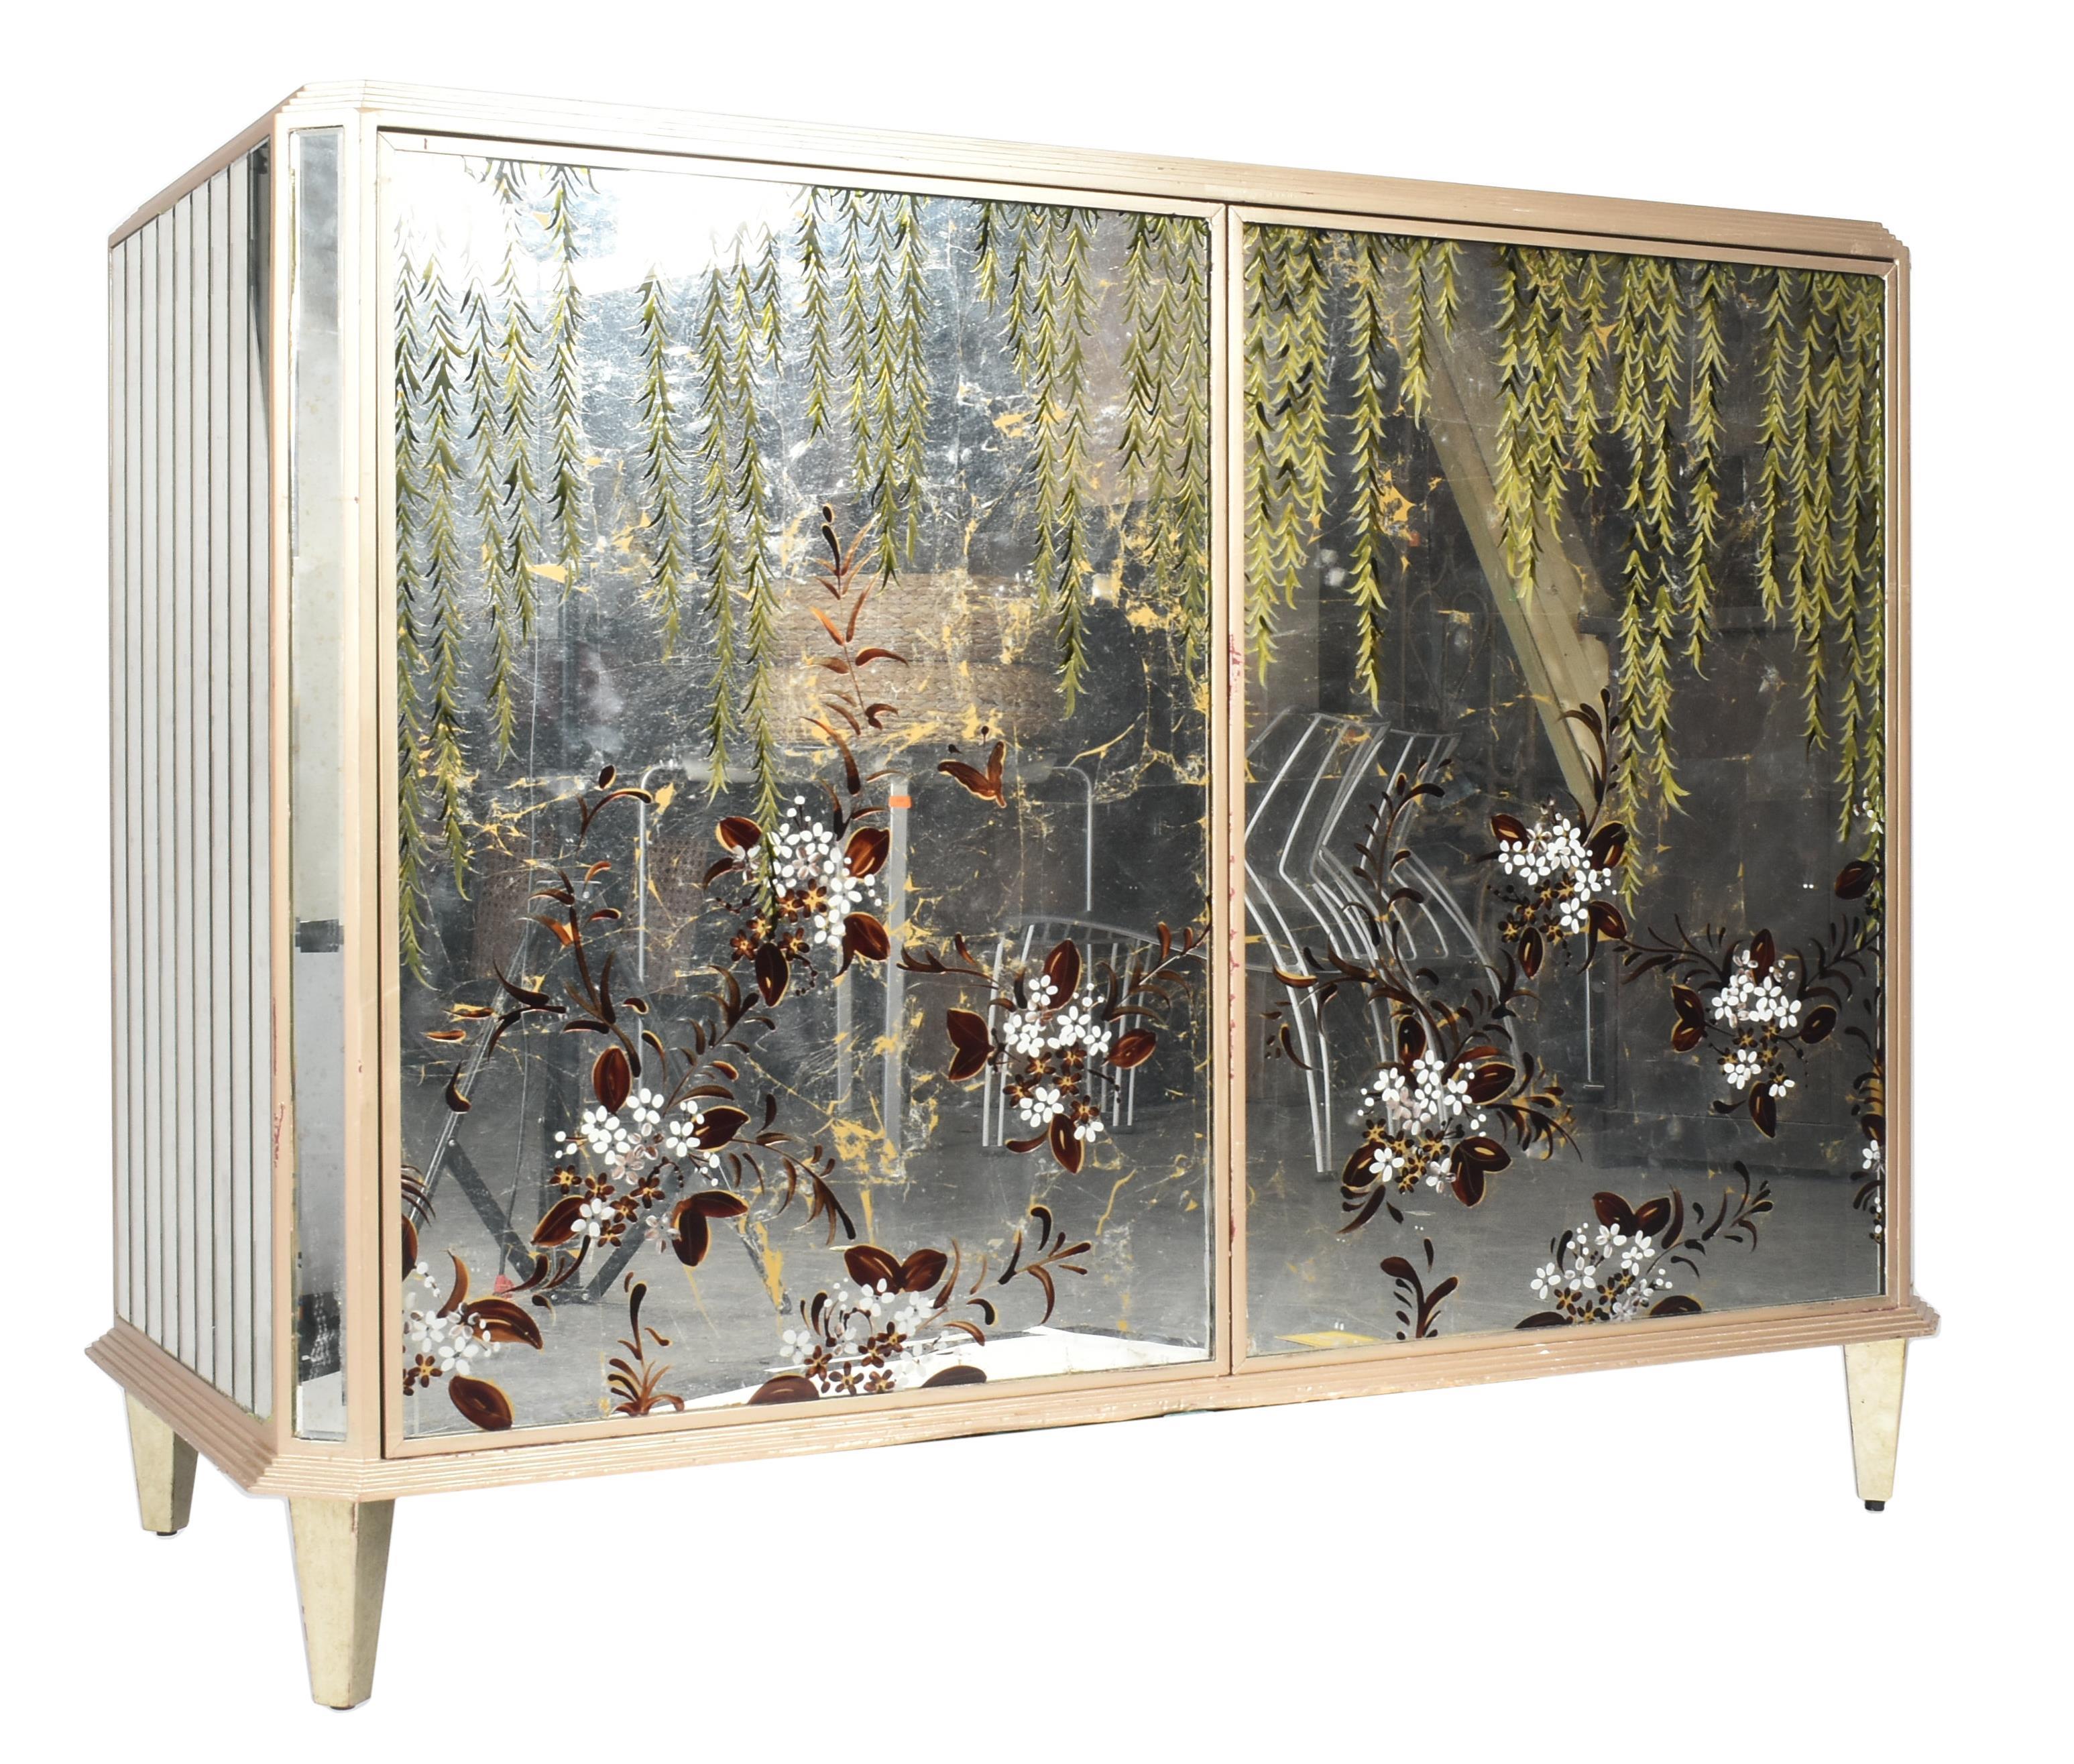 CONTEMPORARY MIRRORED SIDEBOARD FROM THE DORCHESTER